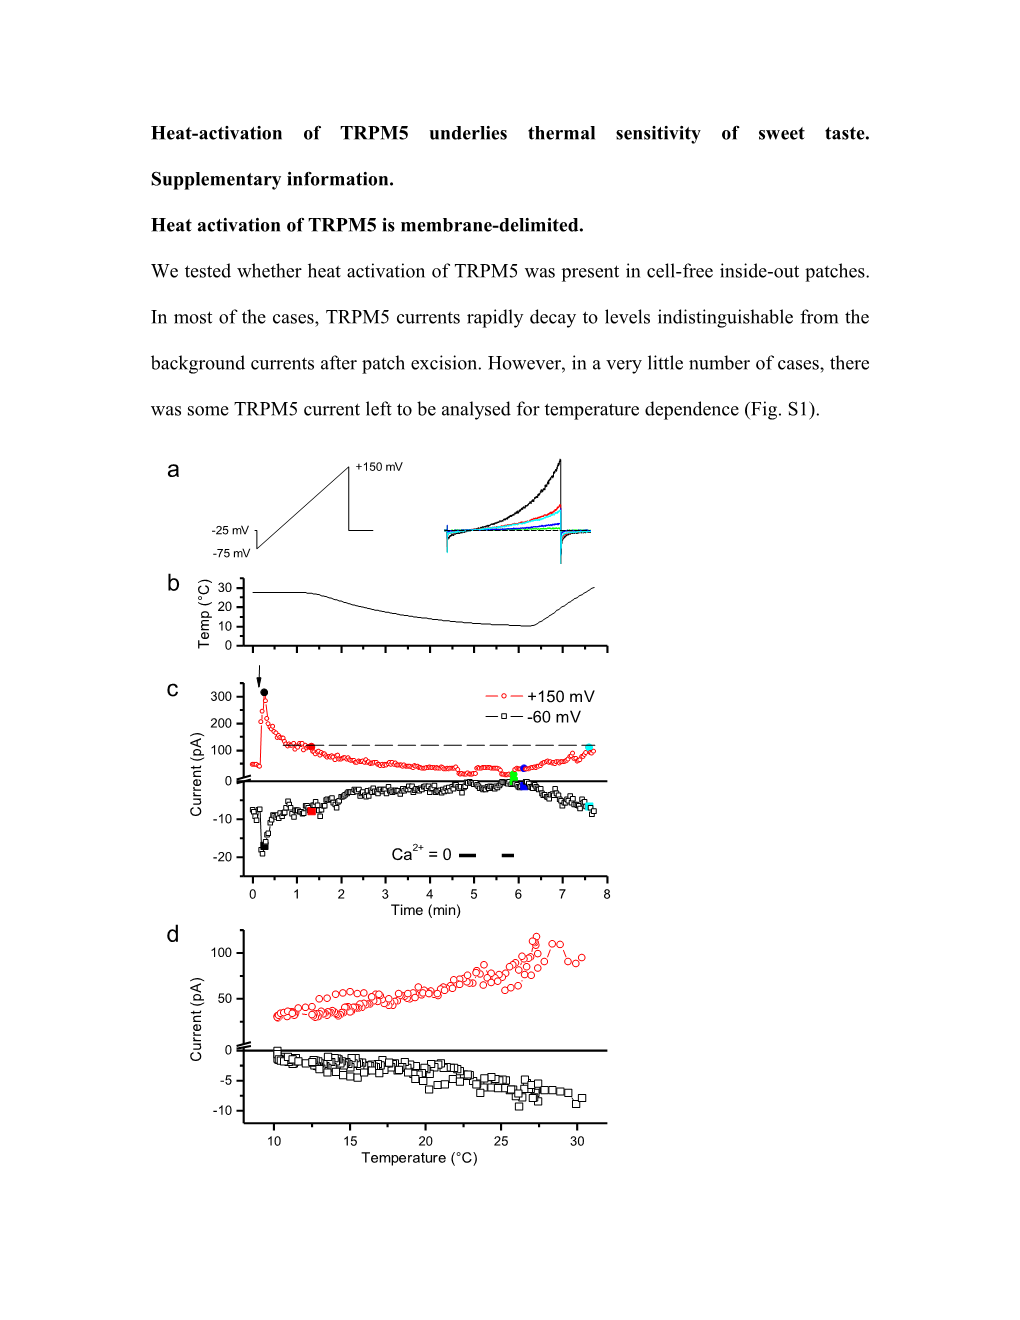 In the Presence of Saturating Intracellular Ca2+ Concentrations, the Gating of TRPM4 And